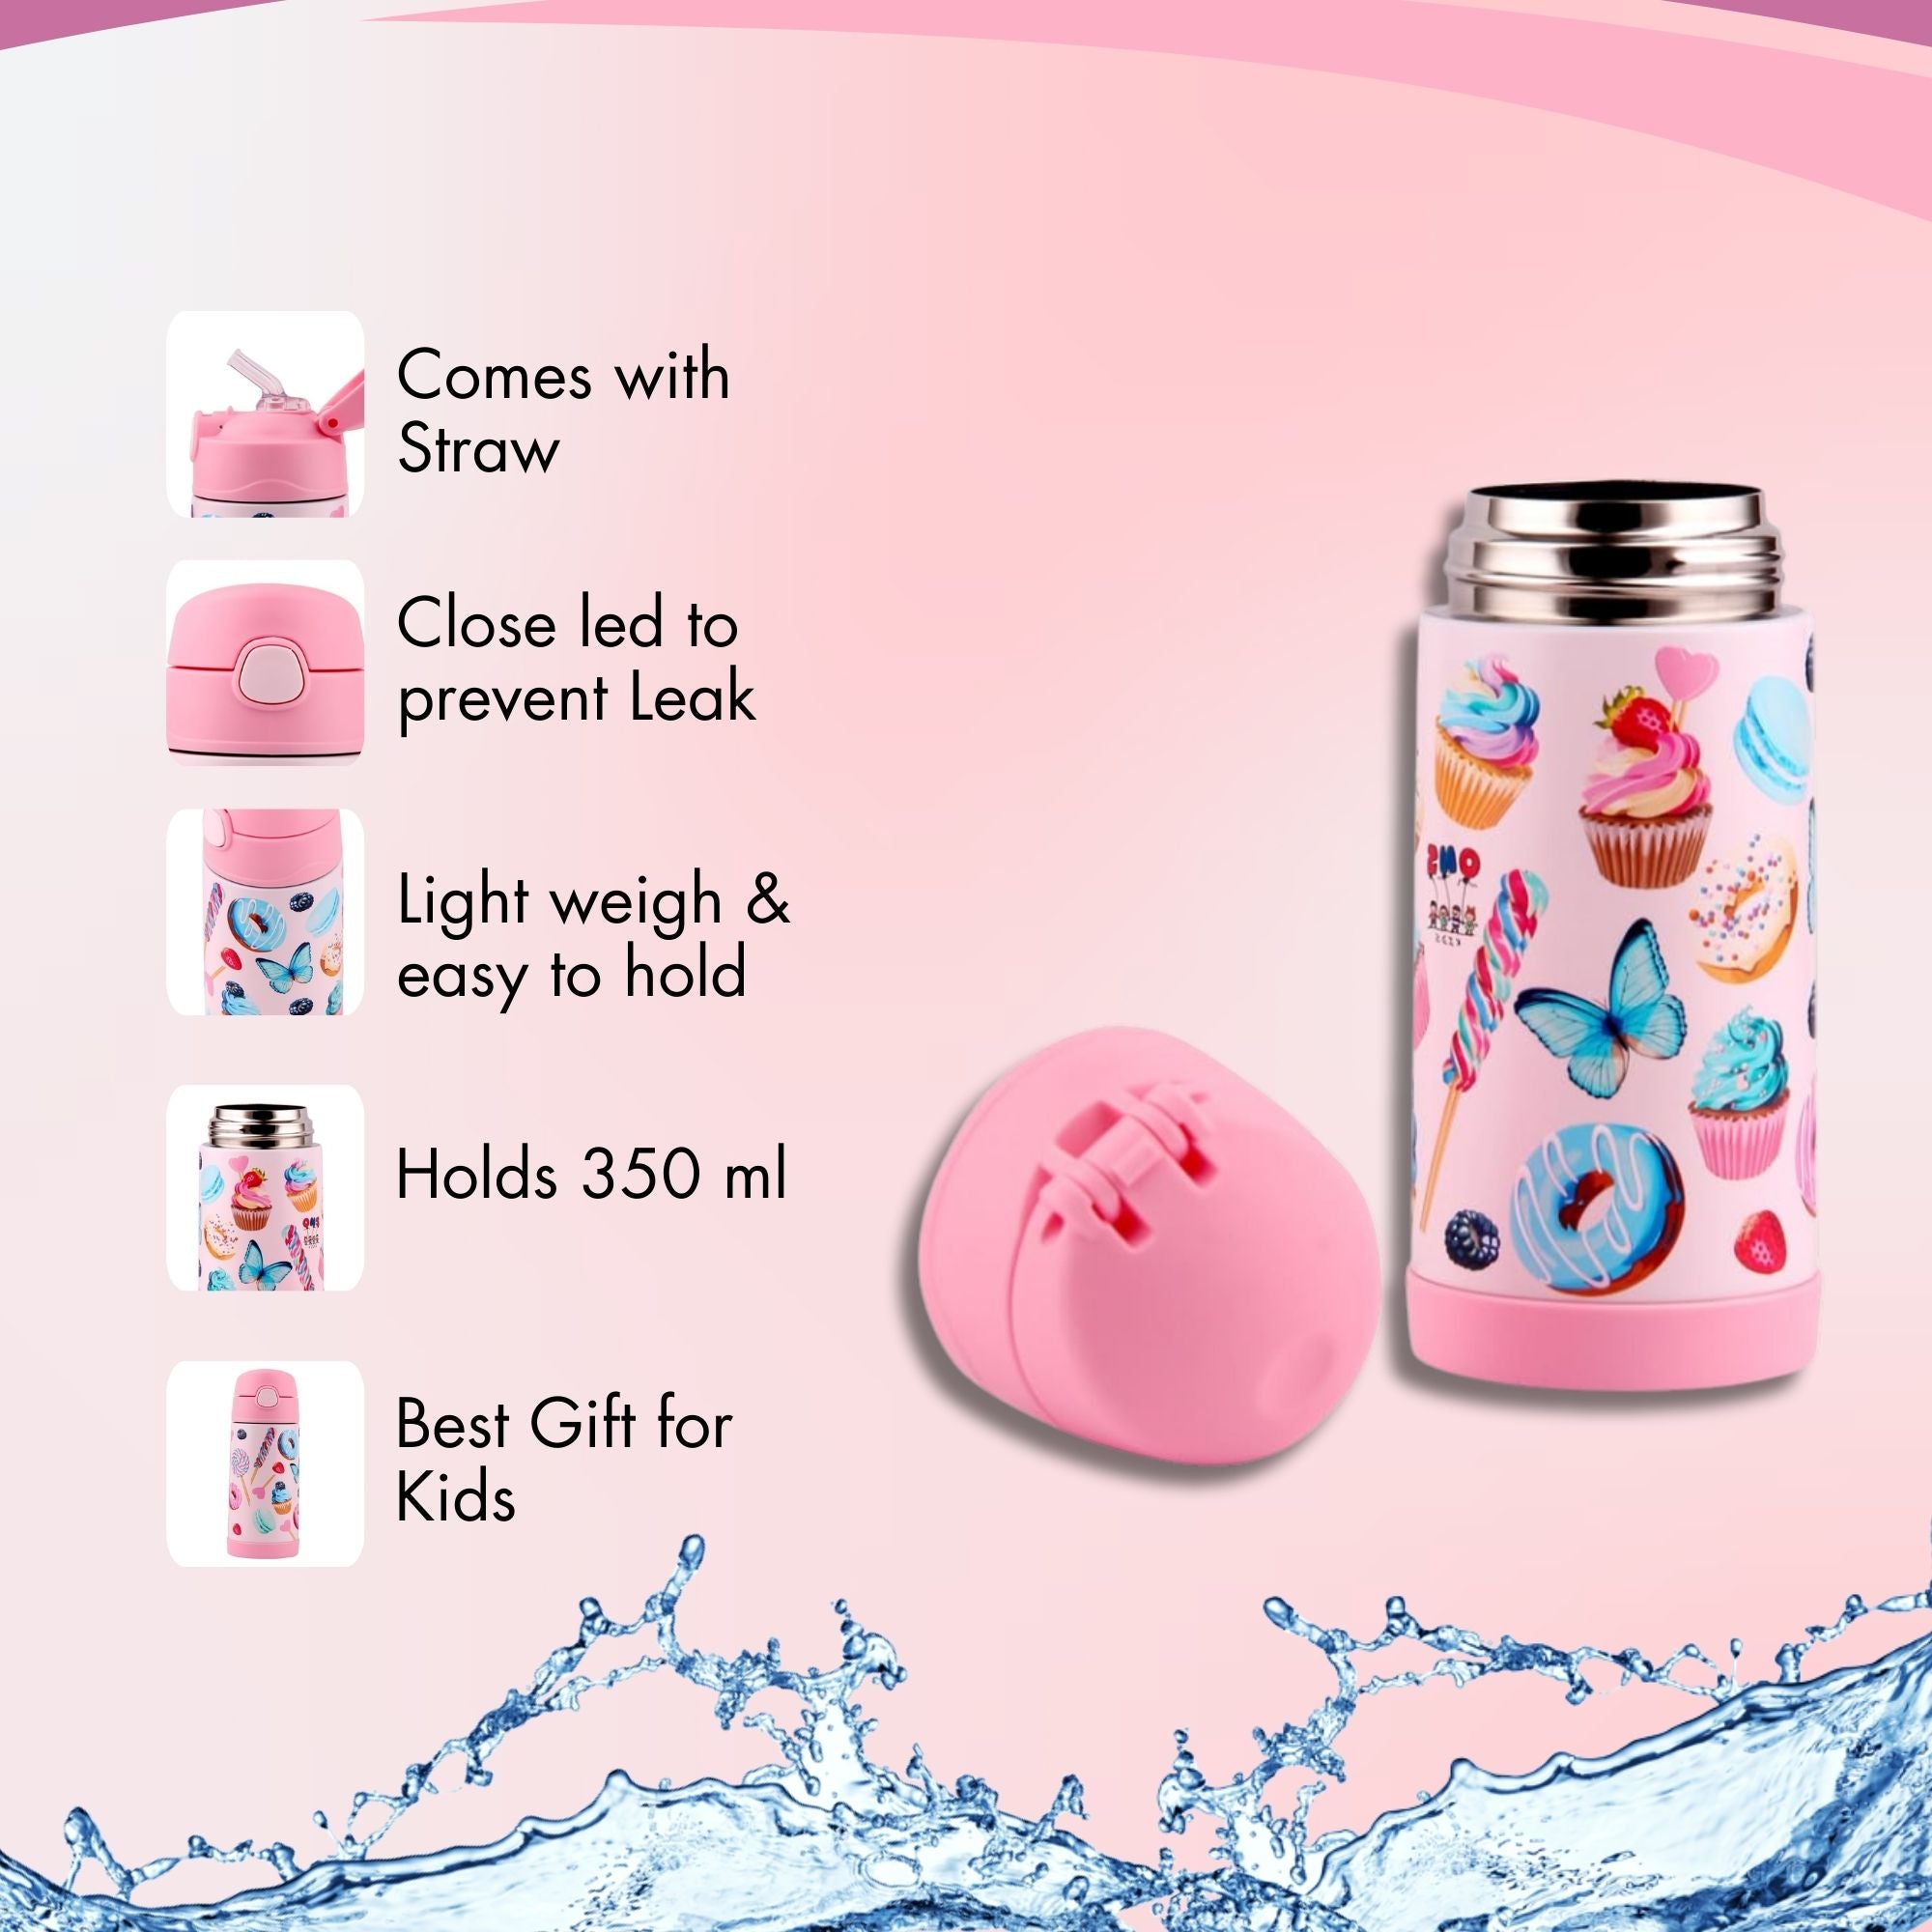 Double Wall Stainless Steel Bottle Cupcake